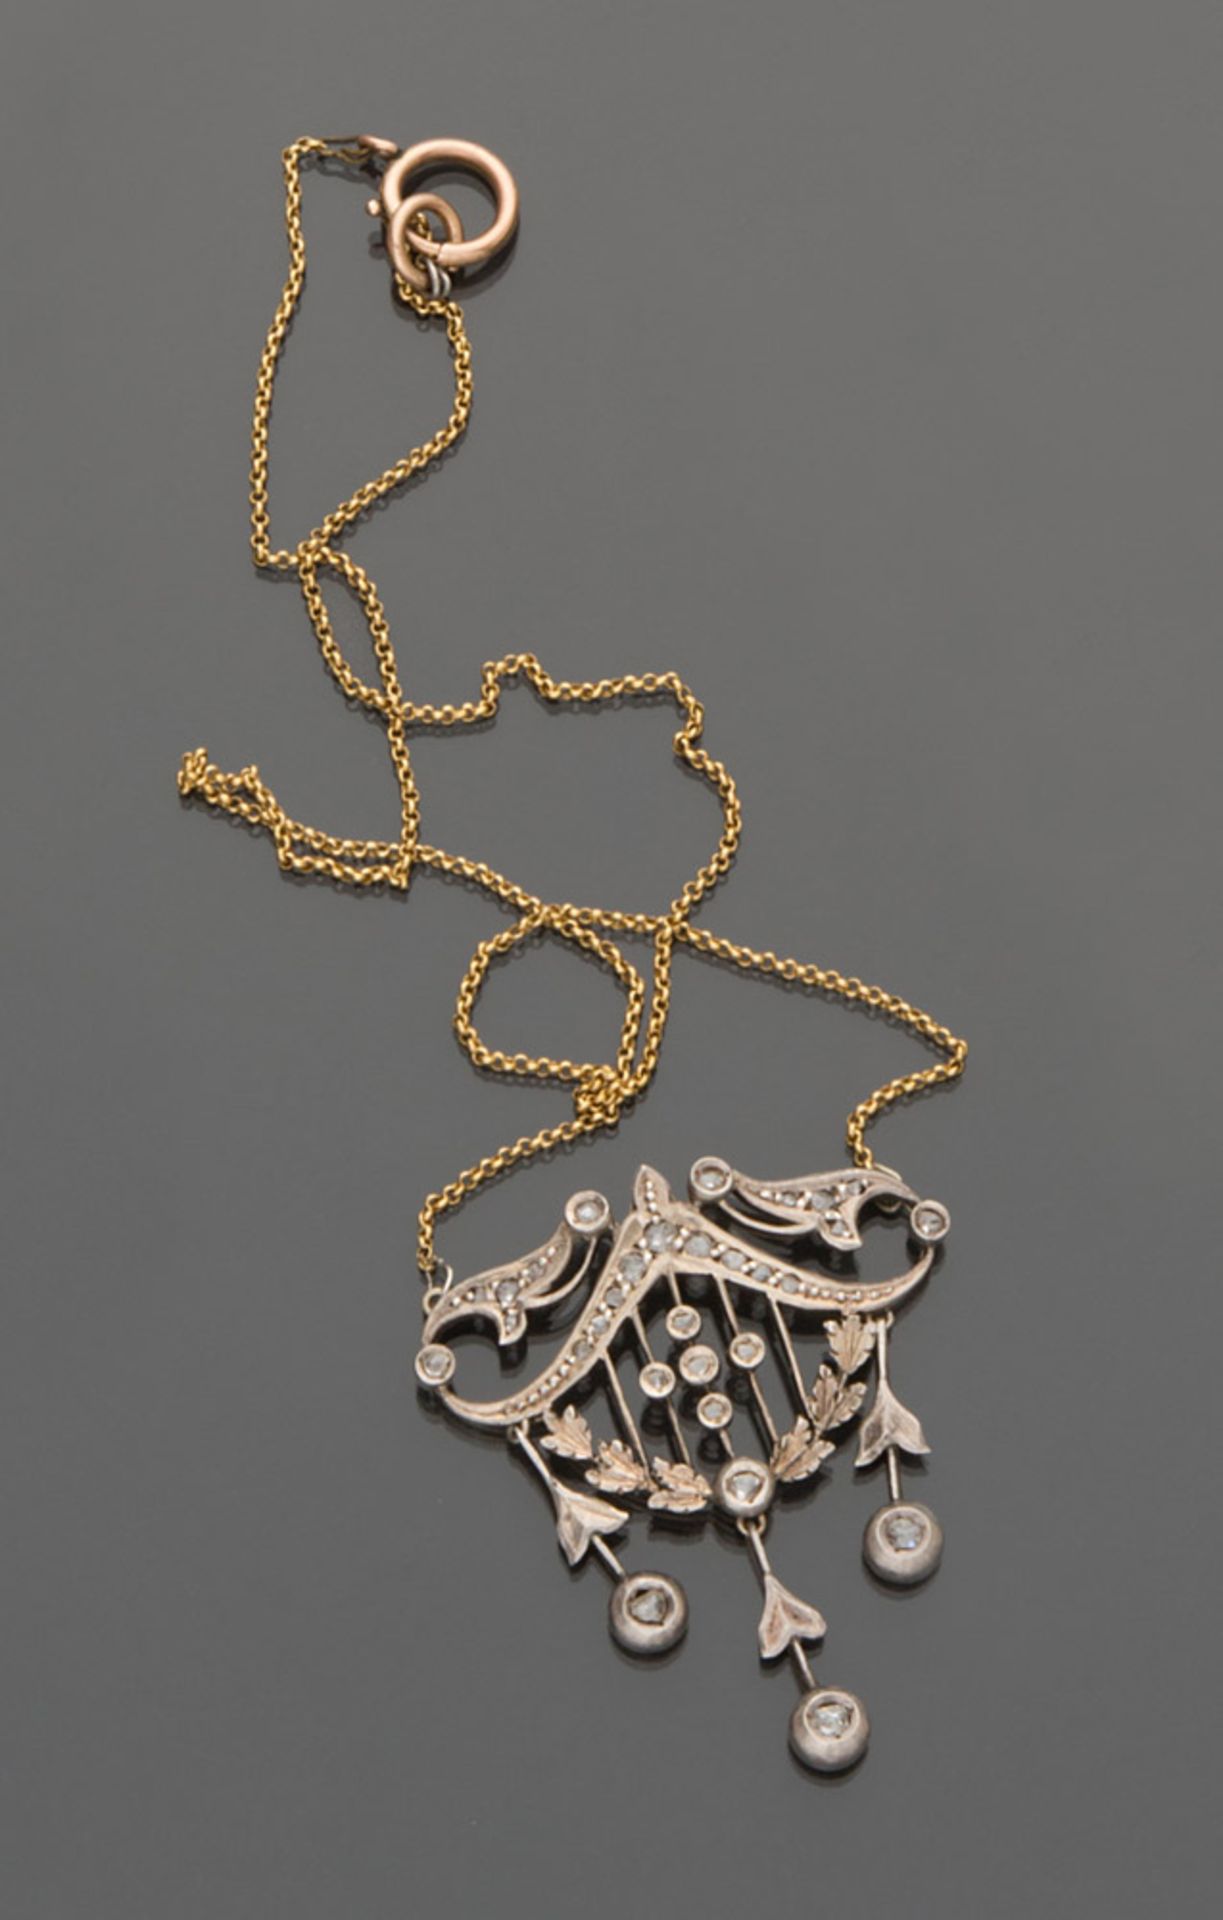 NECKLACE in yellow gold 18 kt., with pendant depicting large ramage, decorated with diamond pink